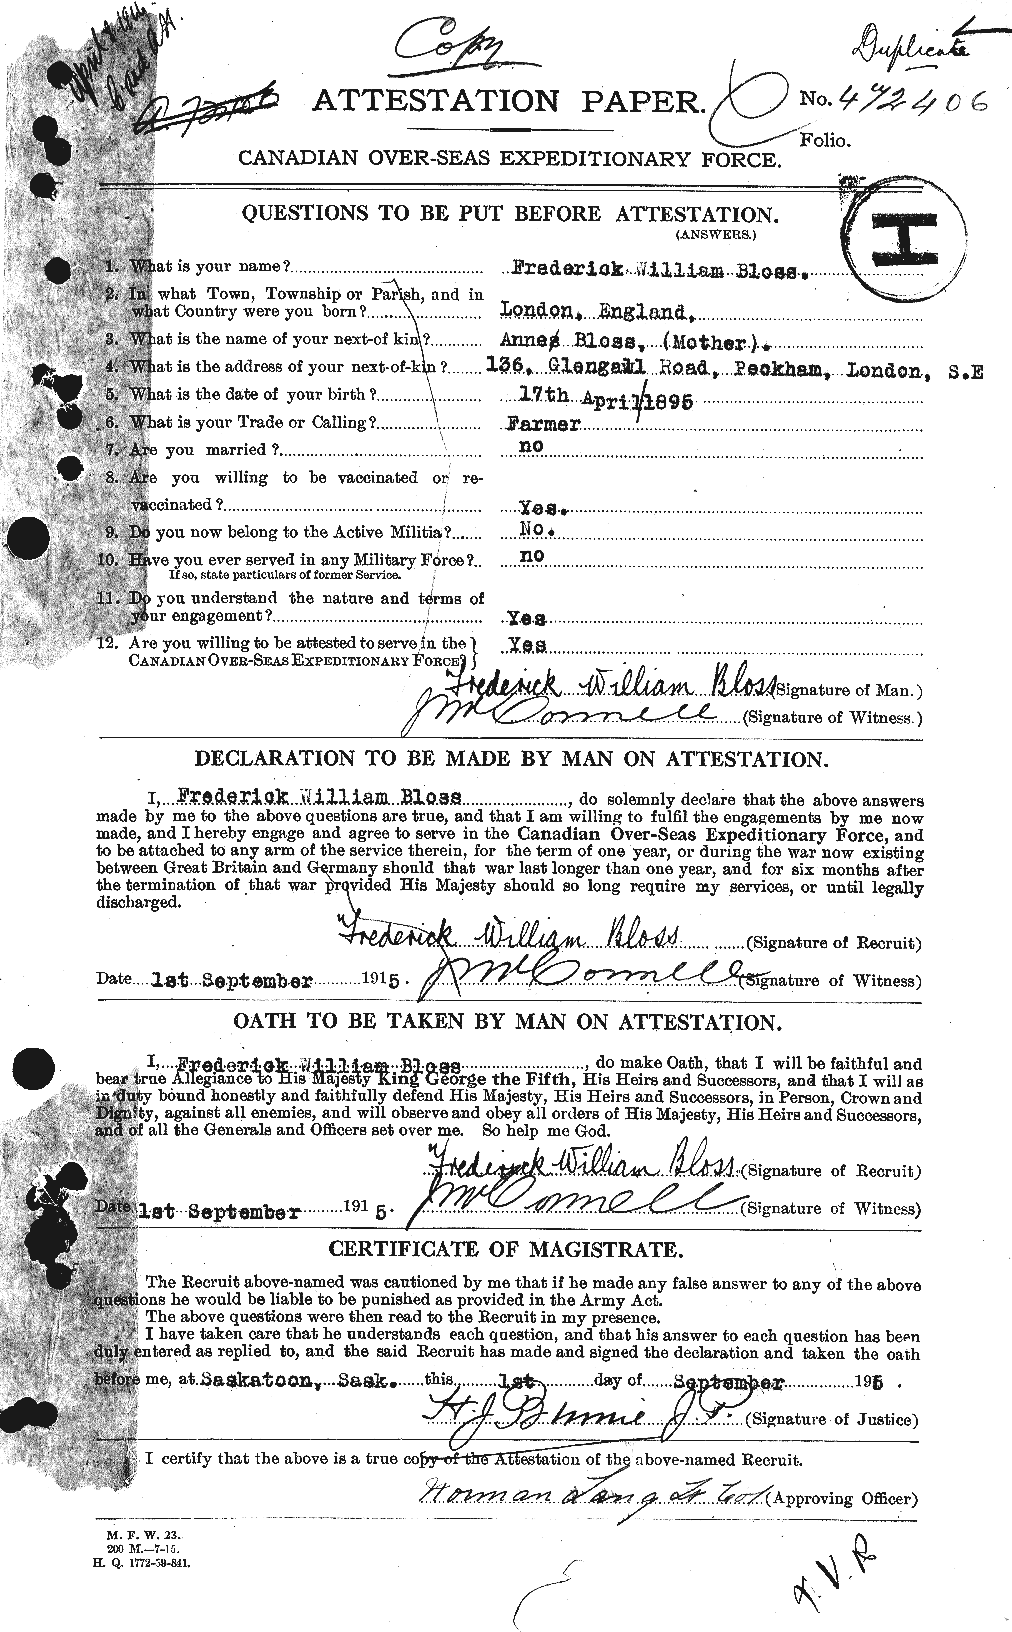 Personnel Records of the First World War - CEF 247360a